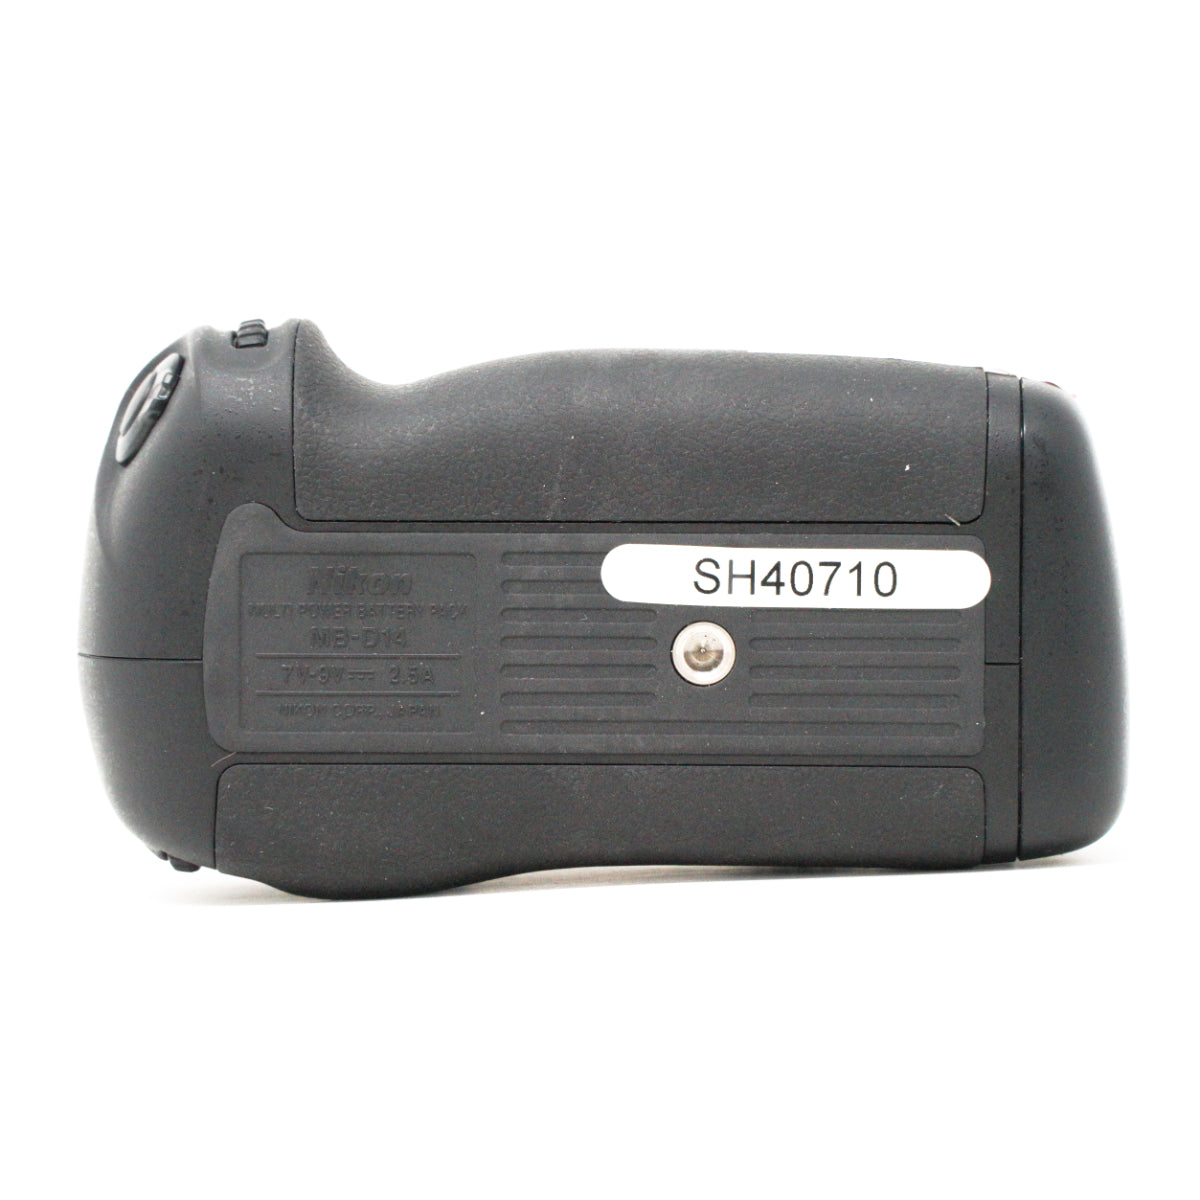 Used Nikon MB-D14 battery grip For D600/D610